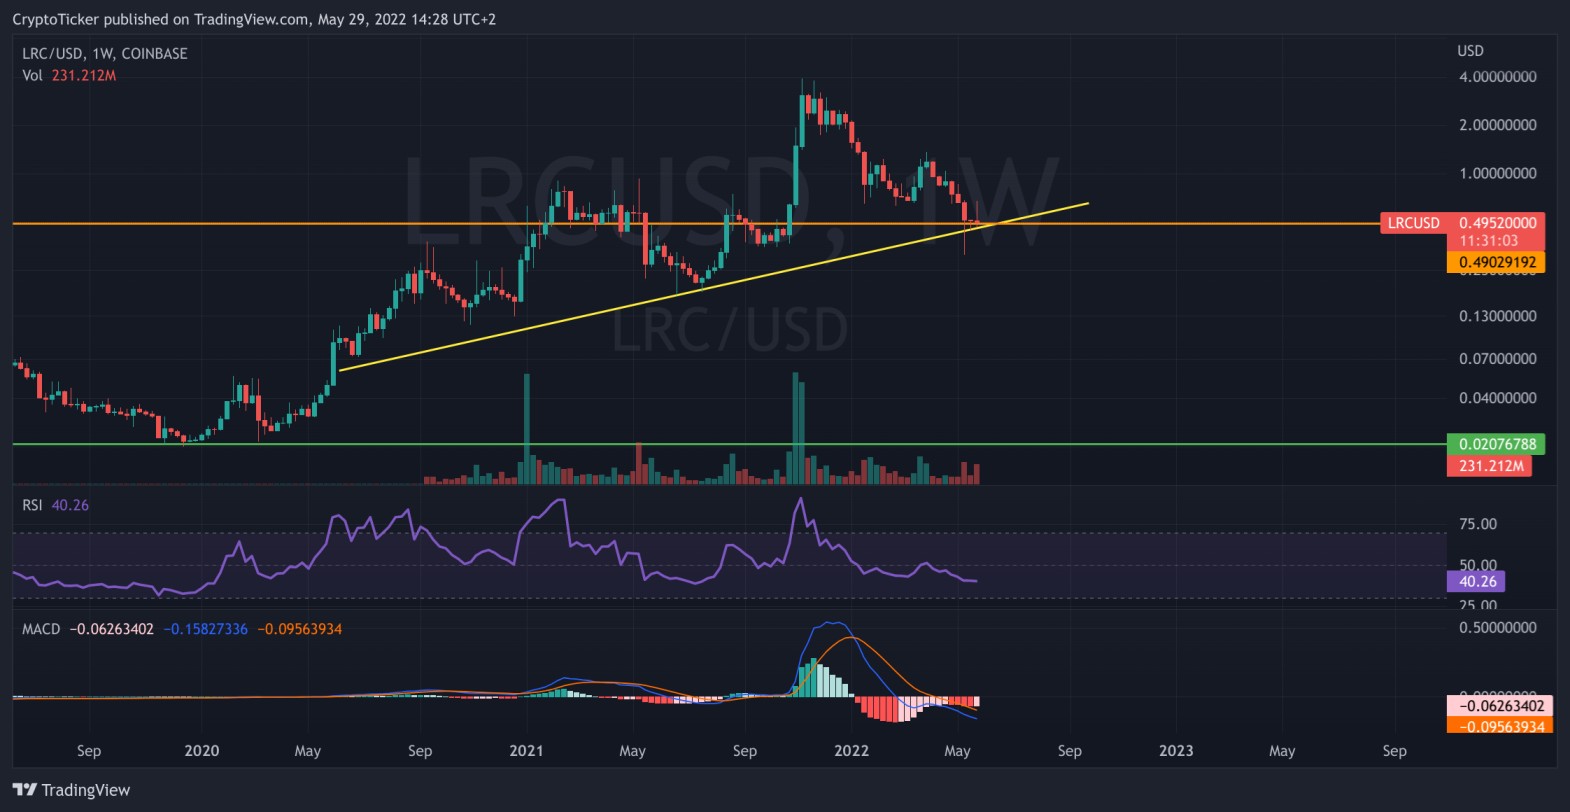 LRC/USD 1-week chart showing the price development of LRC